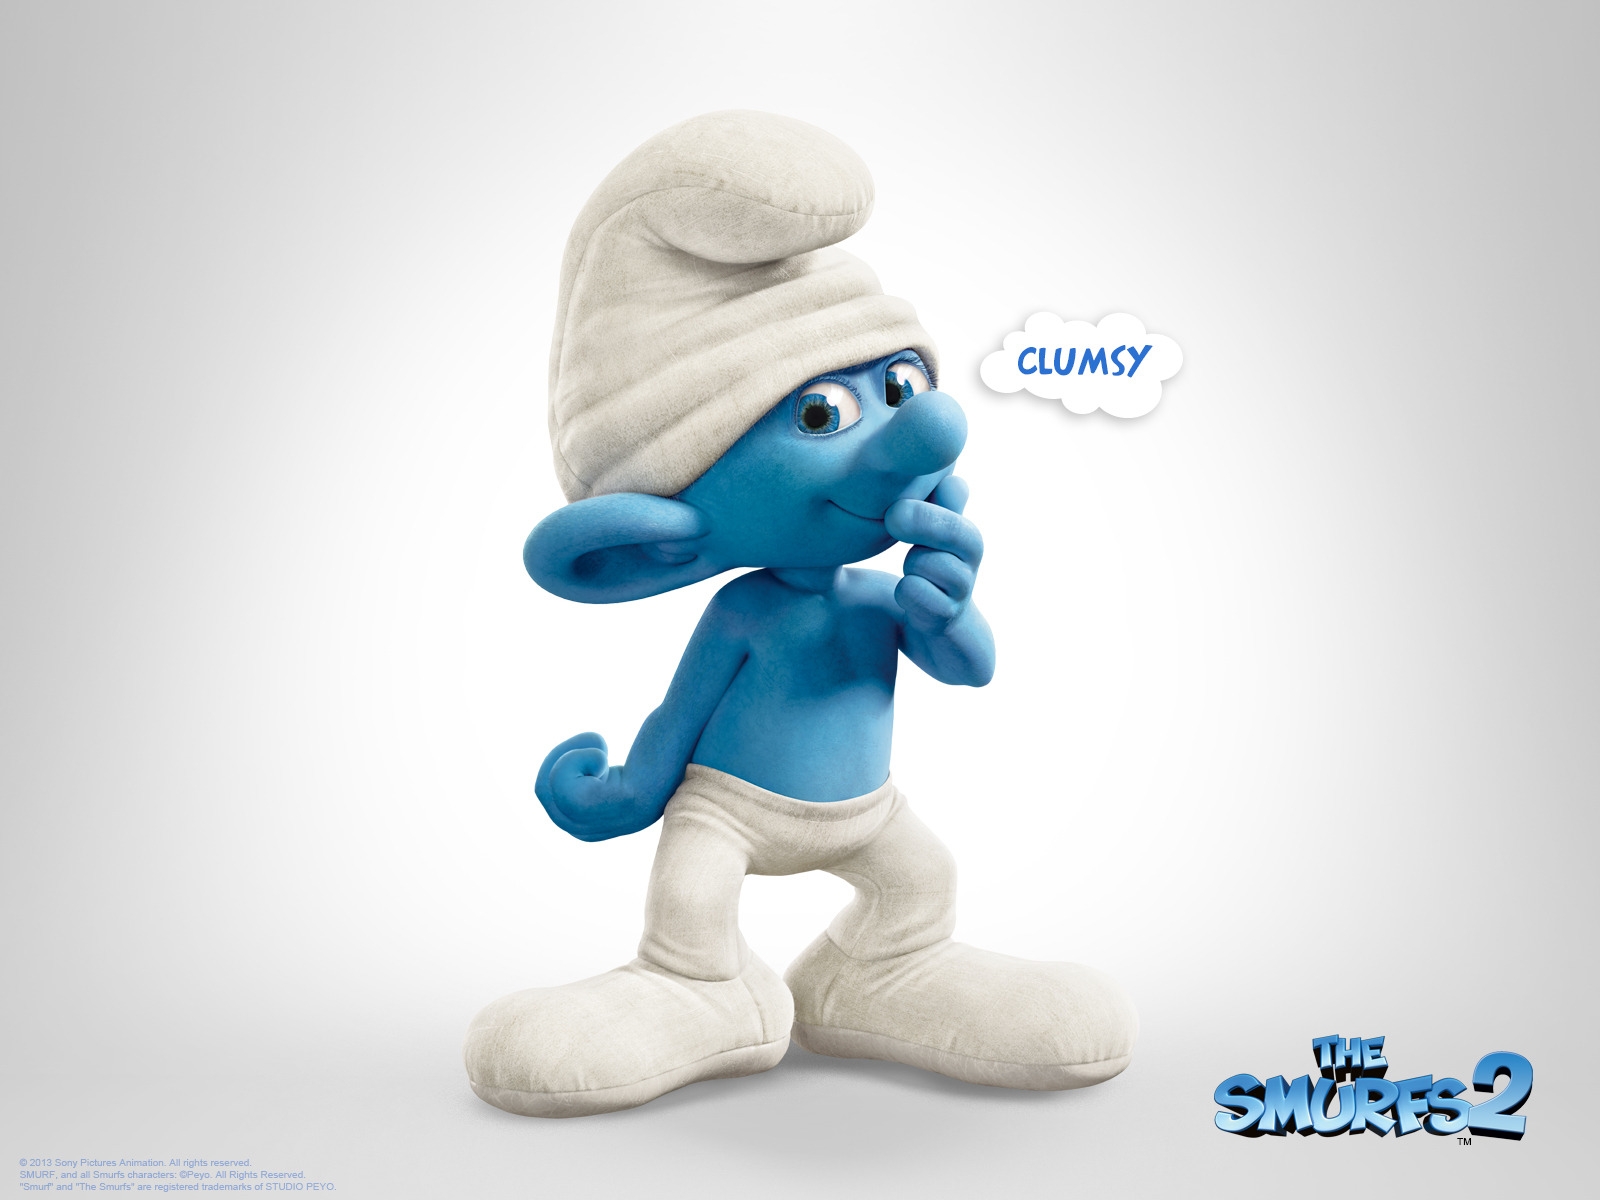 Clumsy The Smurfs 2 for 1600 x 1200 resolution